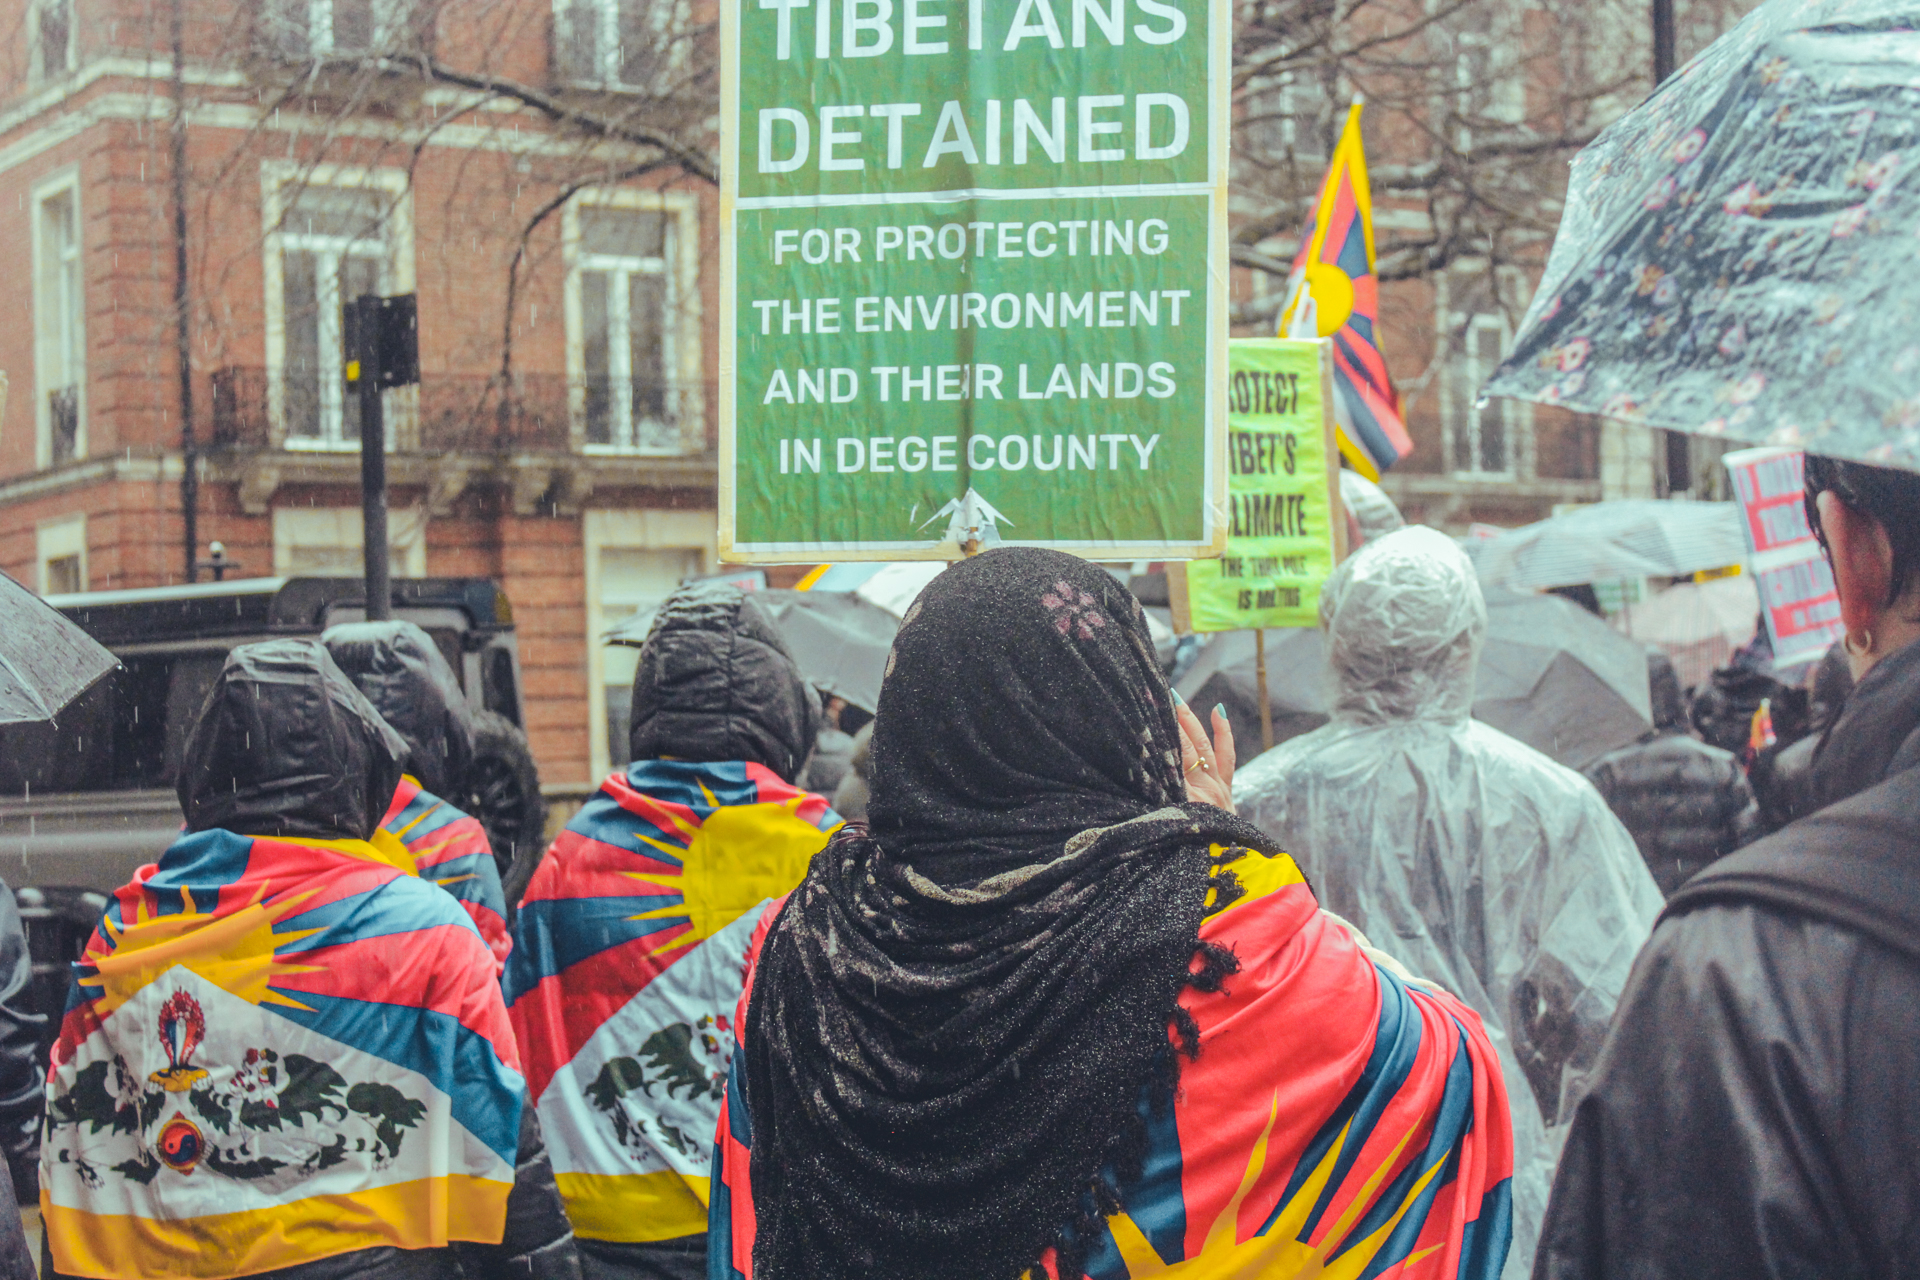 Protesters wear Tibetan flags over their shoulders, holding placards and calling for the freedom of Tibetans detained in Dege County.